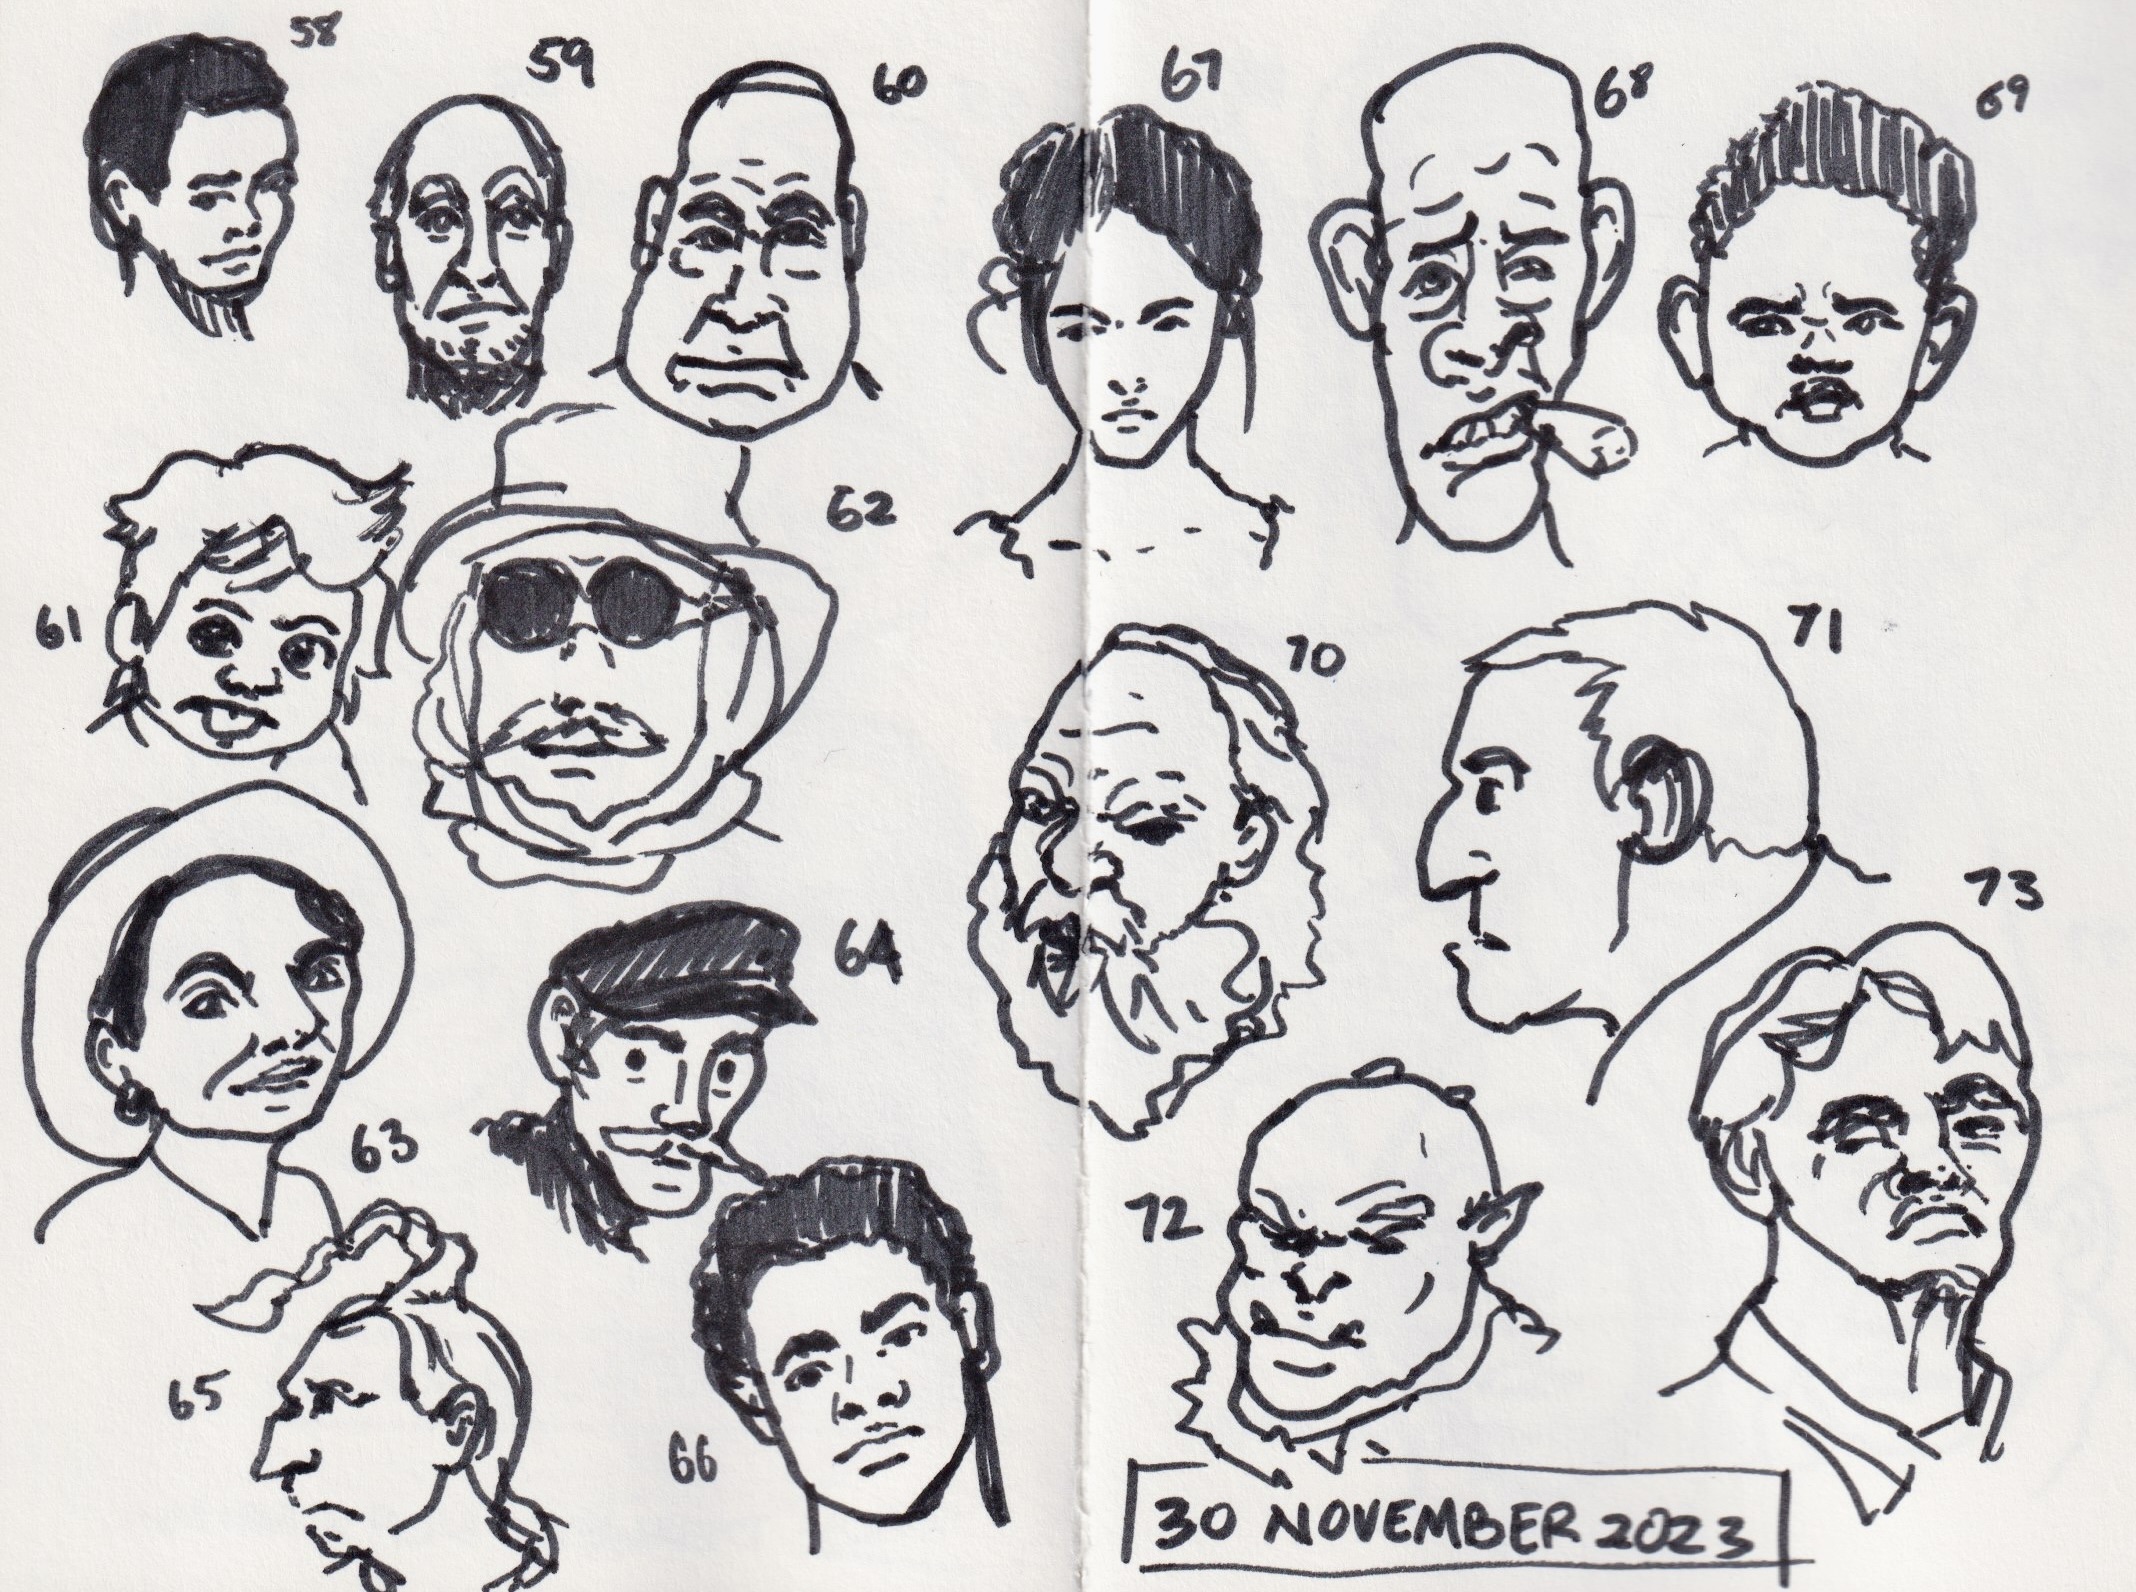 sketchbook4 2 1.jpeg|Page of heads drawn with a marker